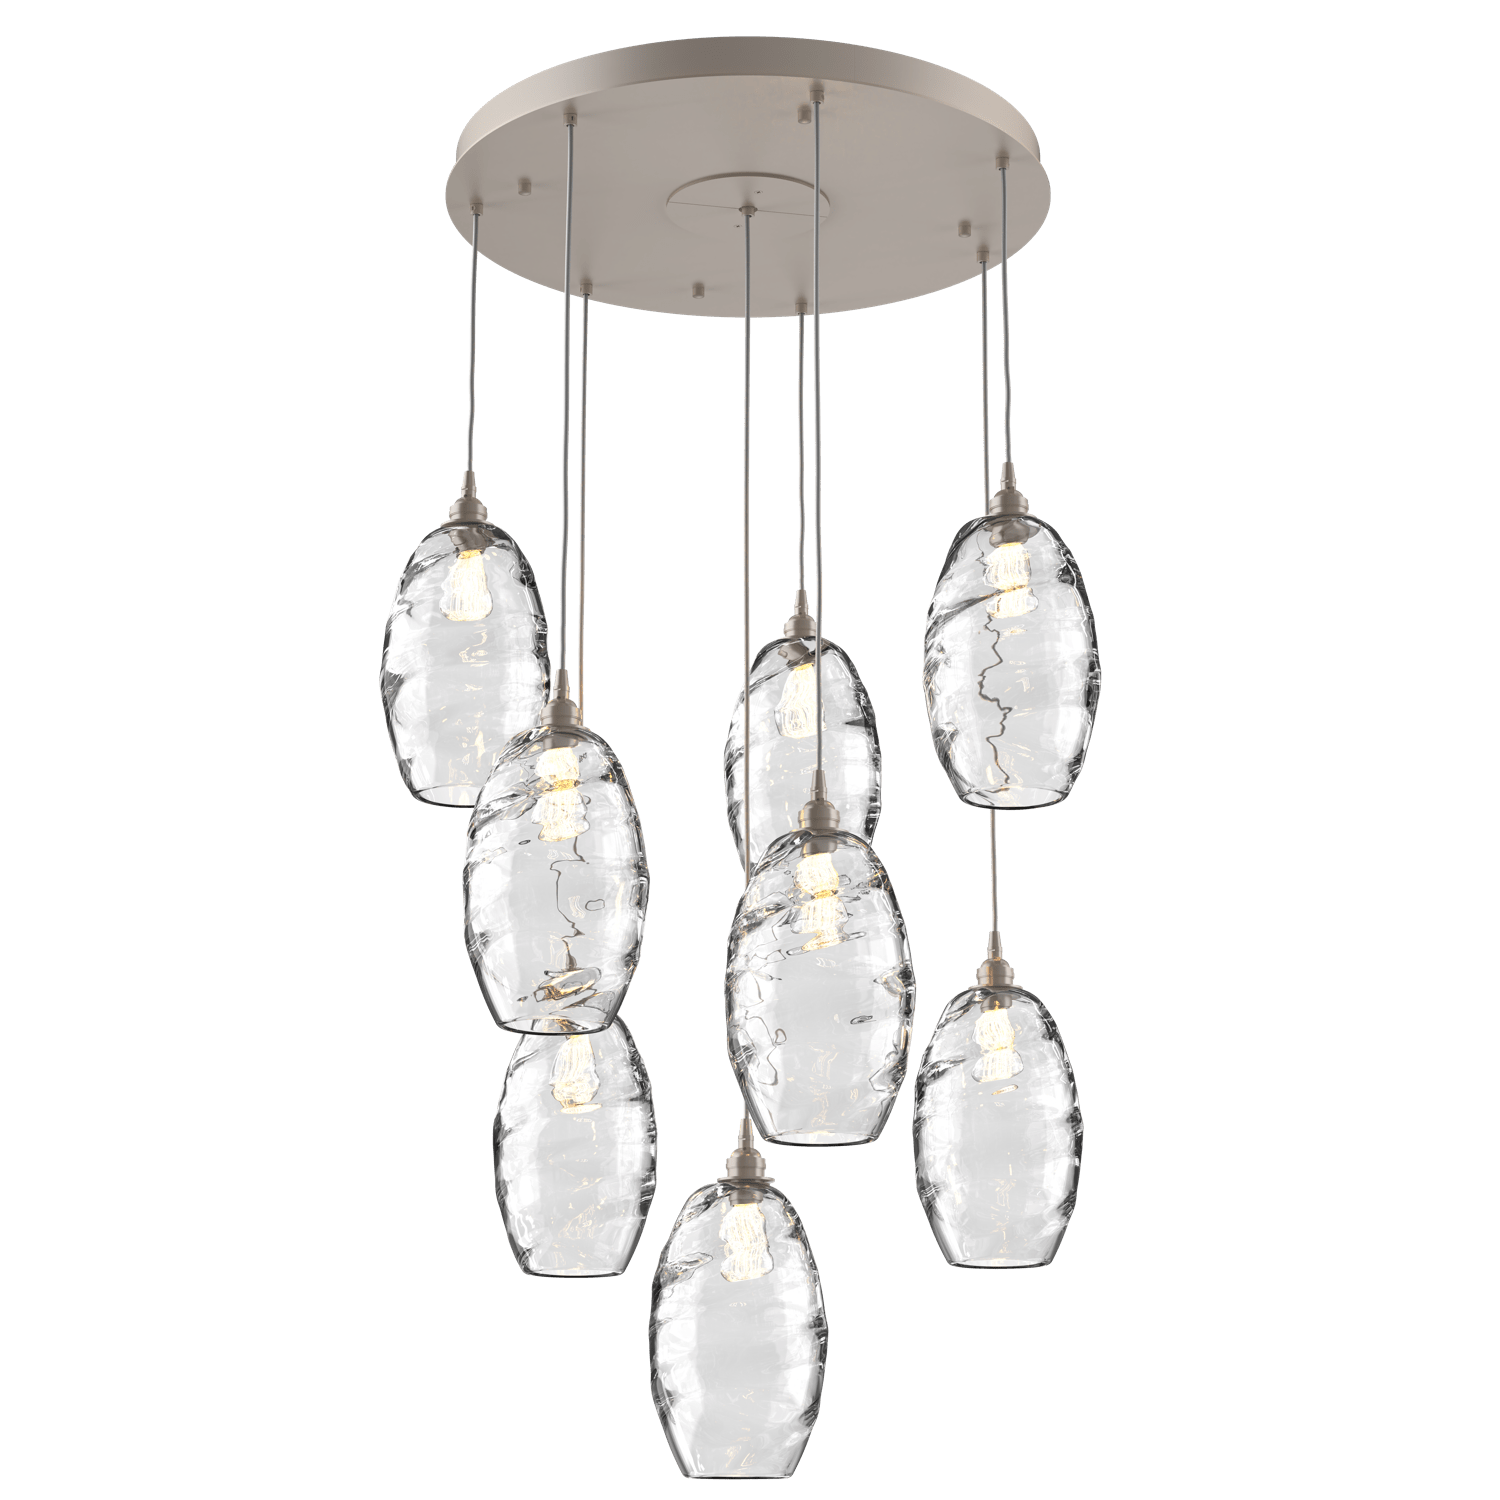 CHB0035-08-BS-OC-Hammerton-Studio-Optic-Blown-Glass-Elisse-8-light-round-pendant-chandelier-with-metallic-beige-silver-finish-and-optic-clear-blown-glass-shades-and-incandescent-lamping